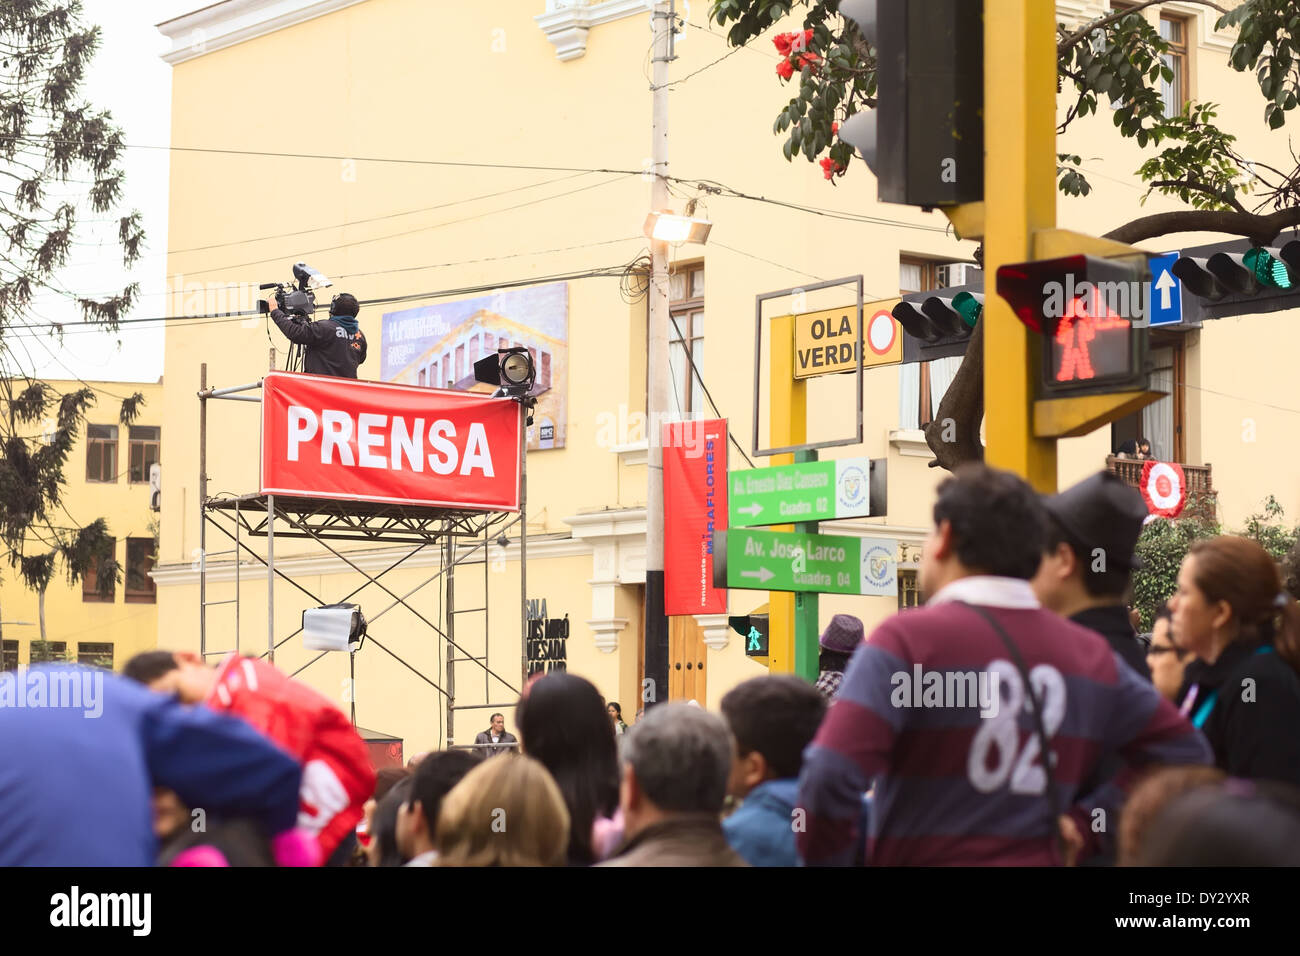 Press videographer on a scaffold at the Wong Parade in Miraflores, Lima, Peru Stock Photo